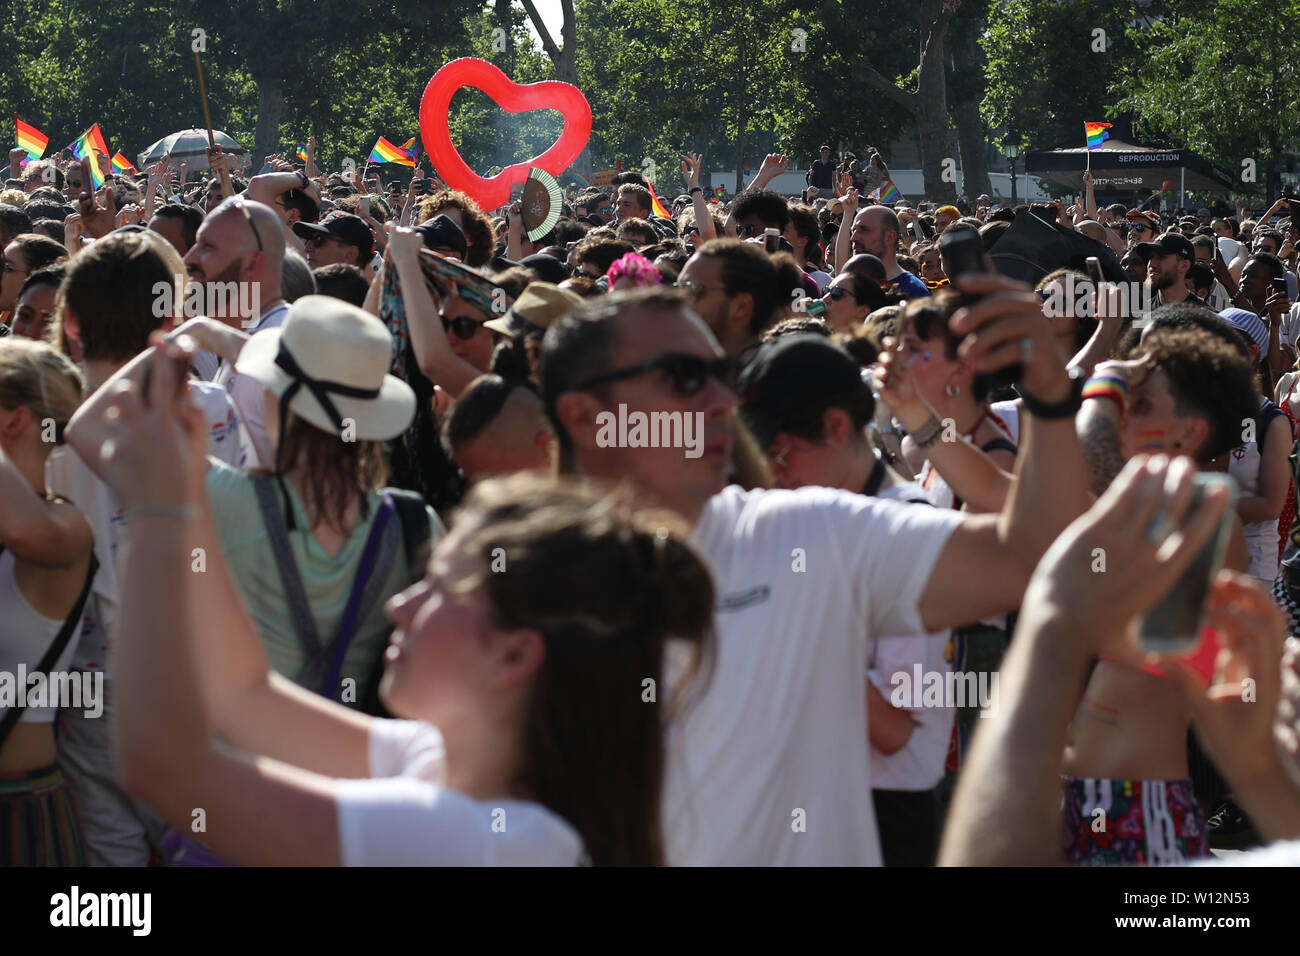 Paris, France. 29th June, 2019. A massive crowd of people march in a gay pride parade on June 29, 2019 in Paris, France. Credit: Brazil Photo Press/Alamy Live News  Stock Photo